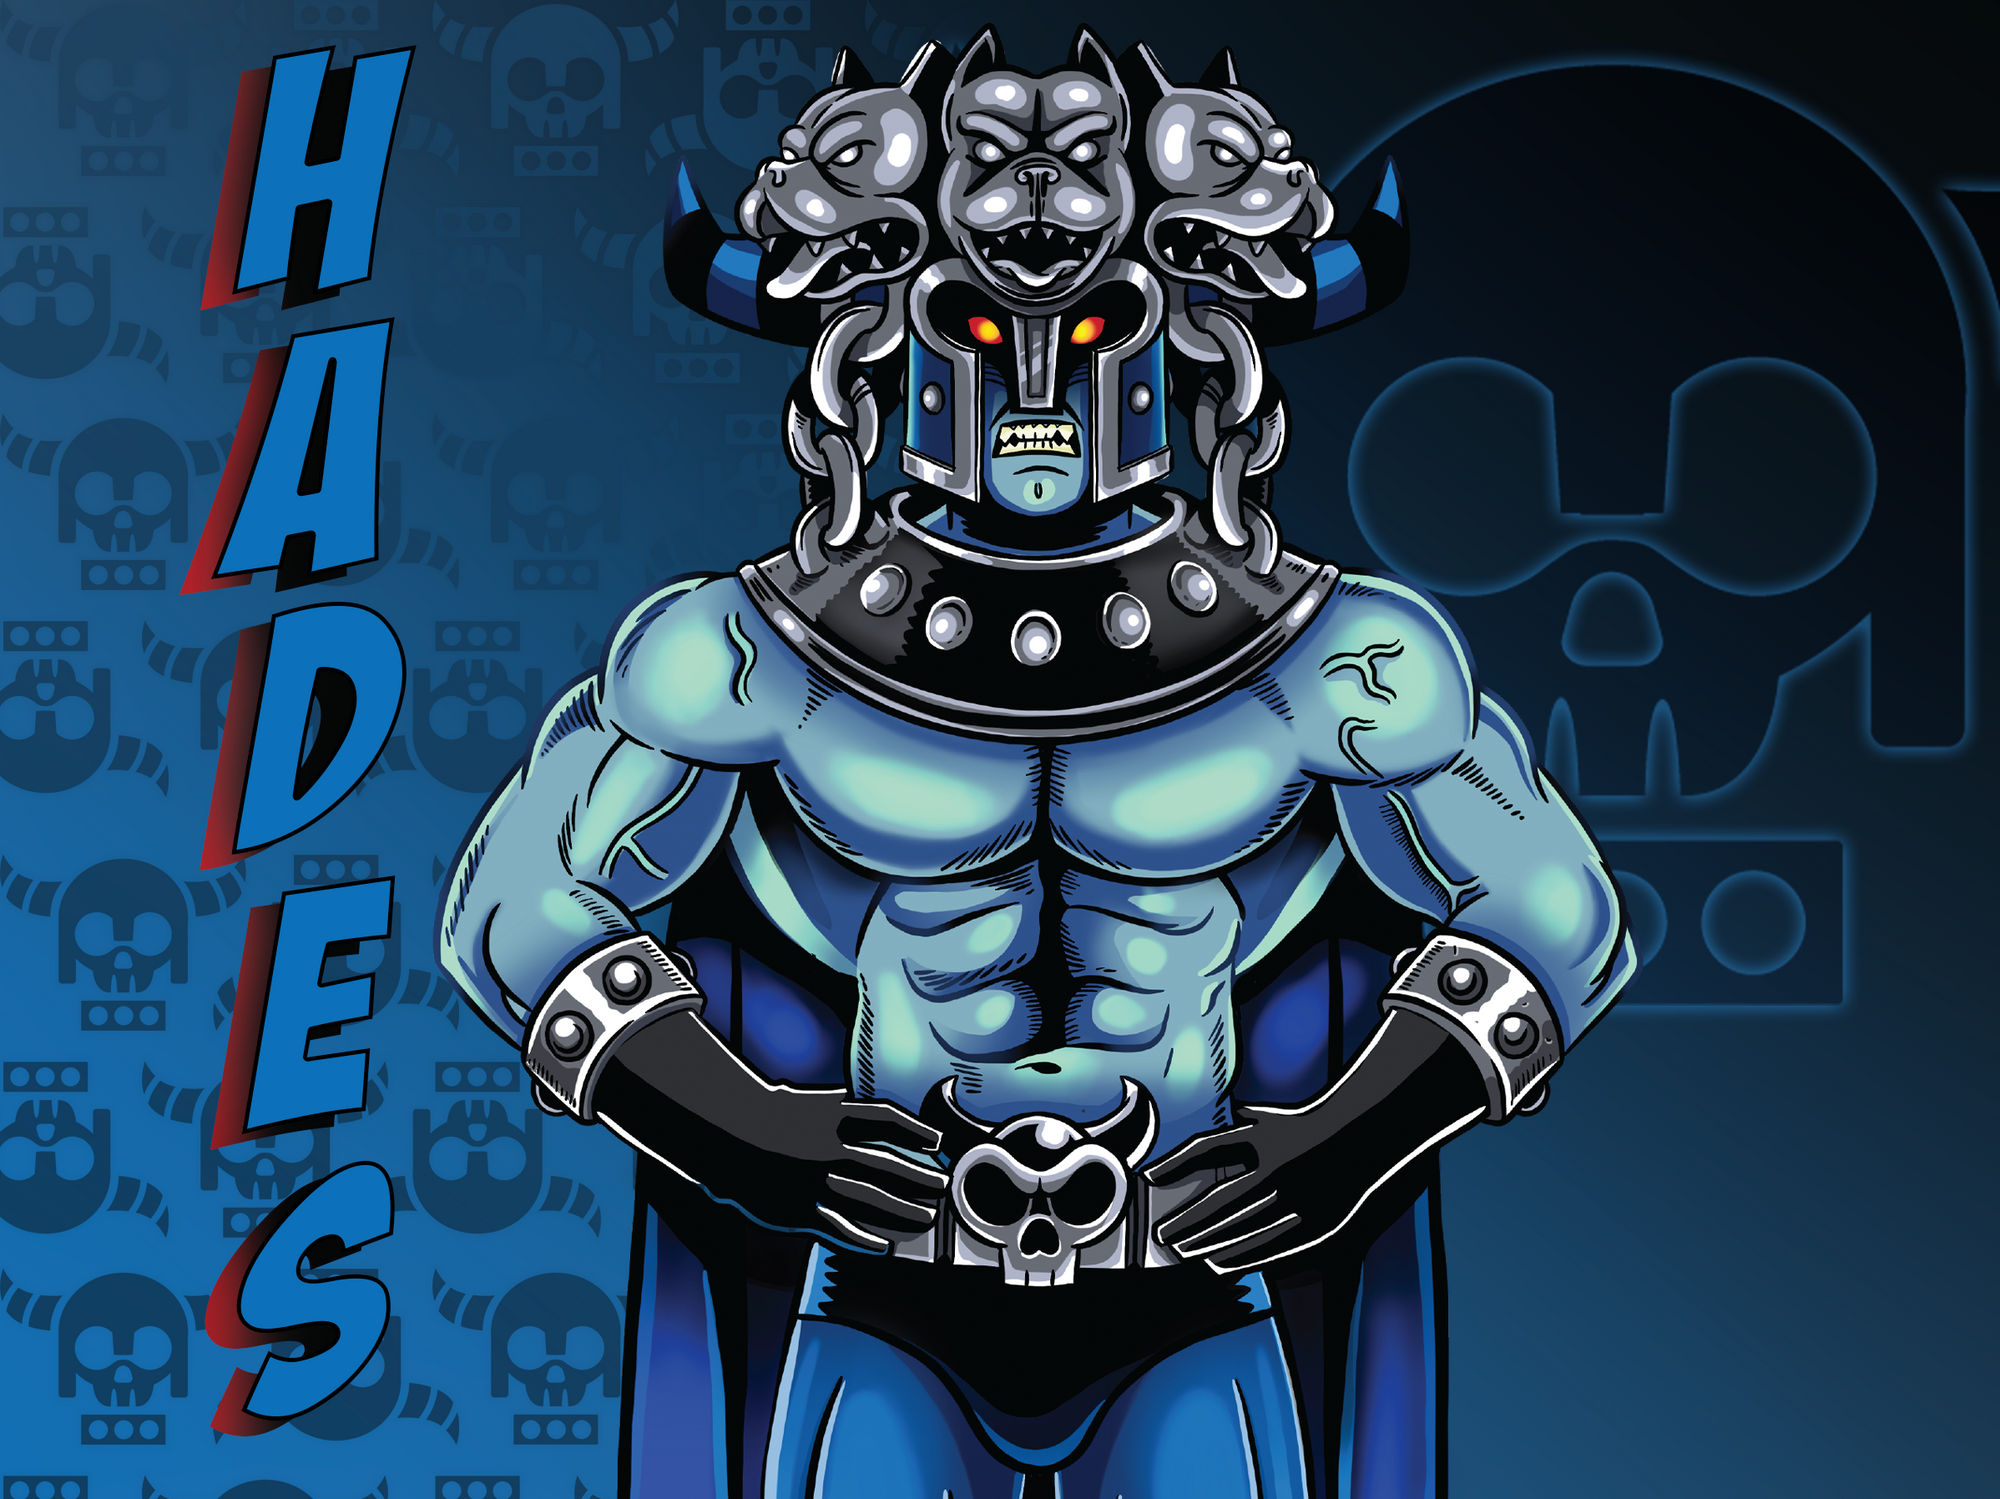 Comic style Greek Mythology character, wearing Cerberus helmet with navy and black horns, and skull belt with horned skull icon in background, with name title Hades